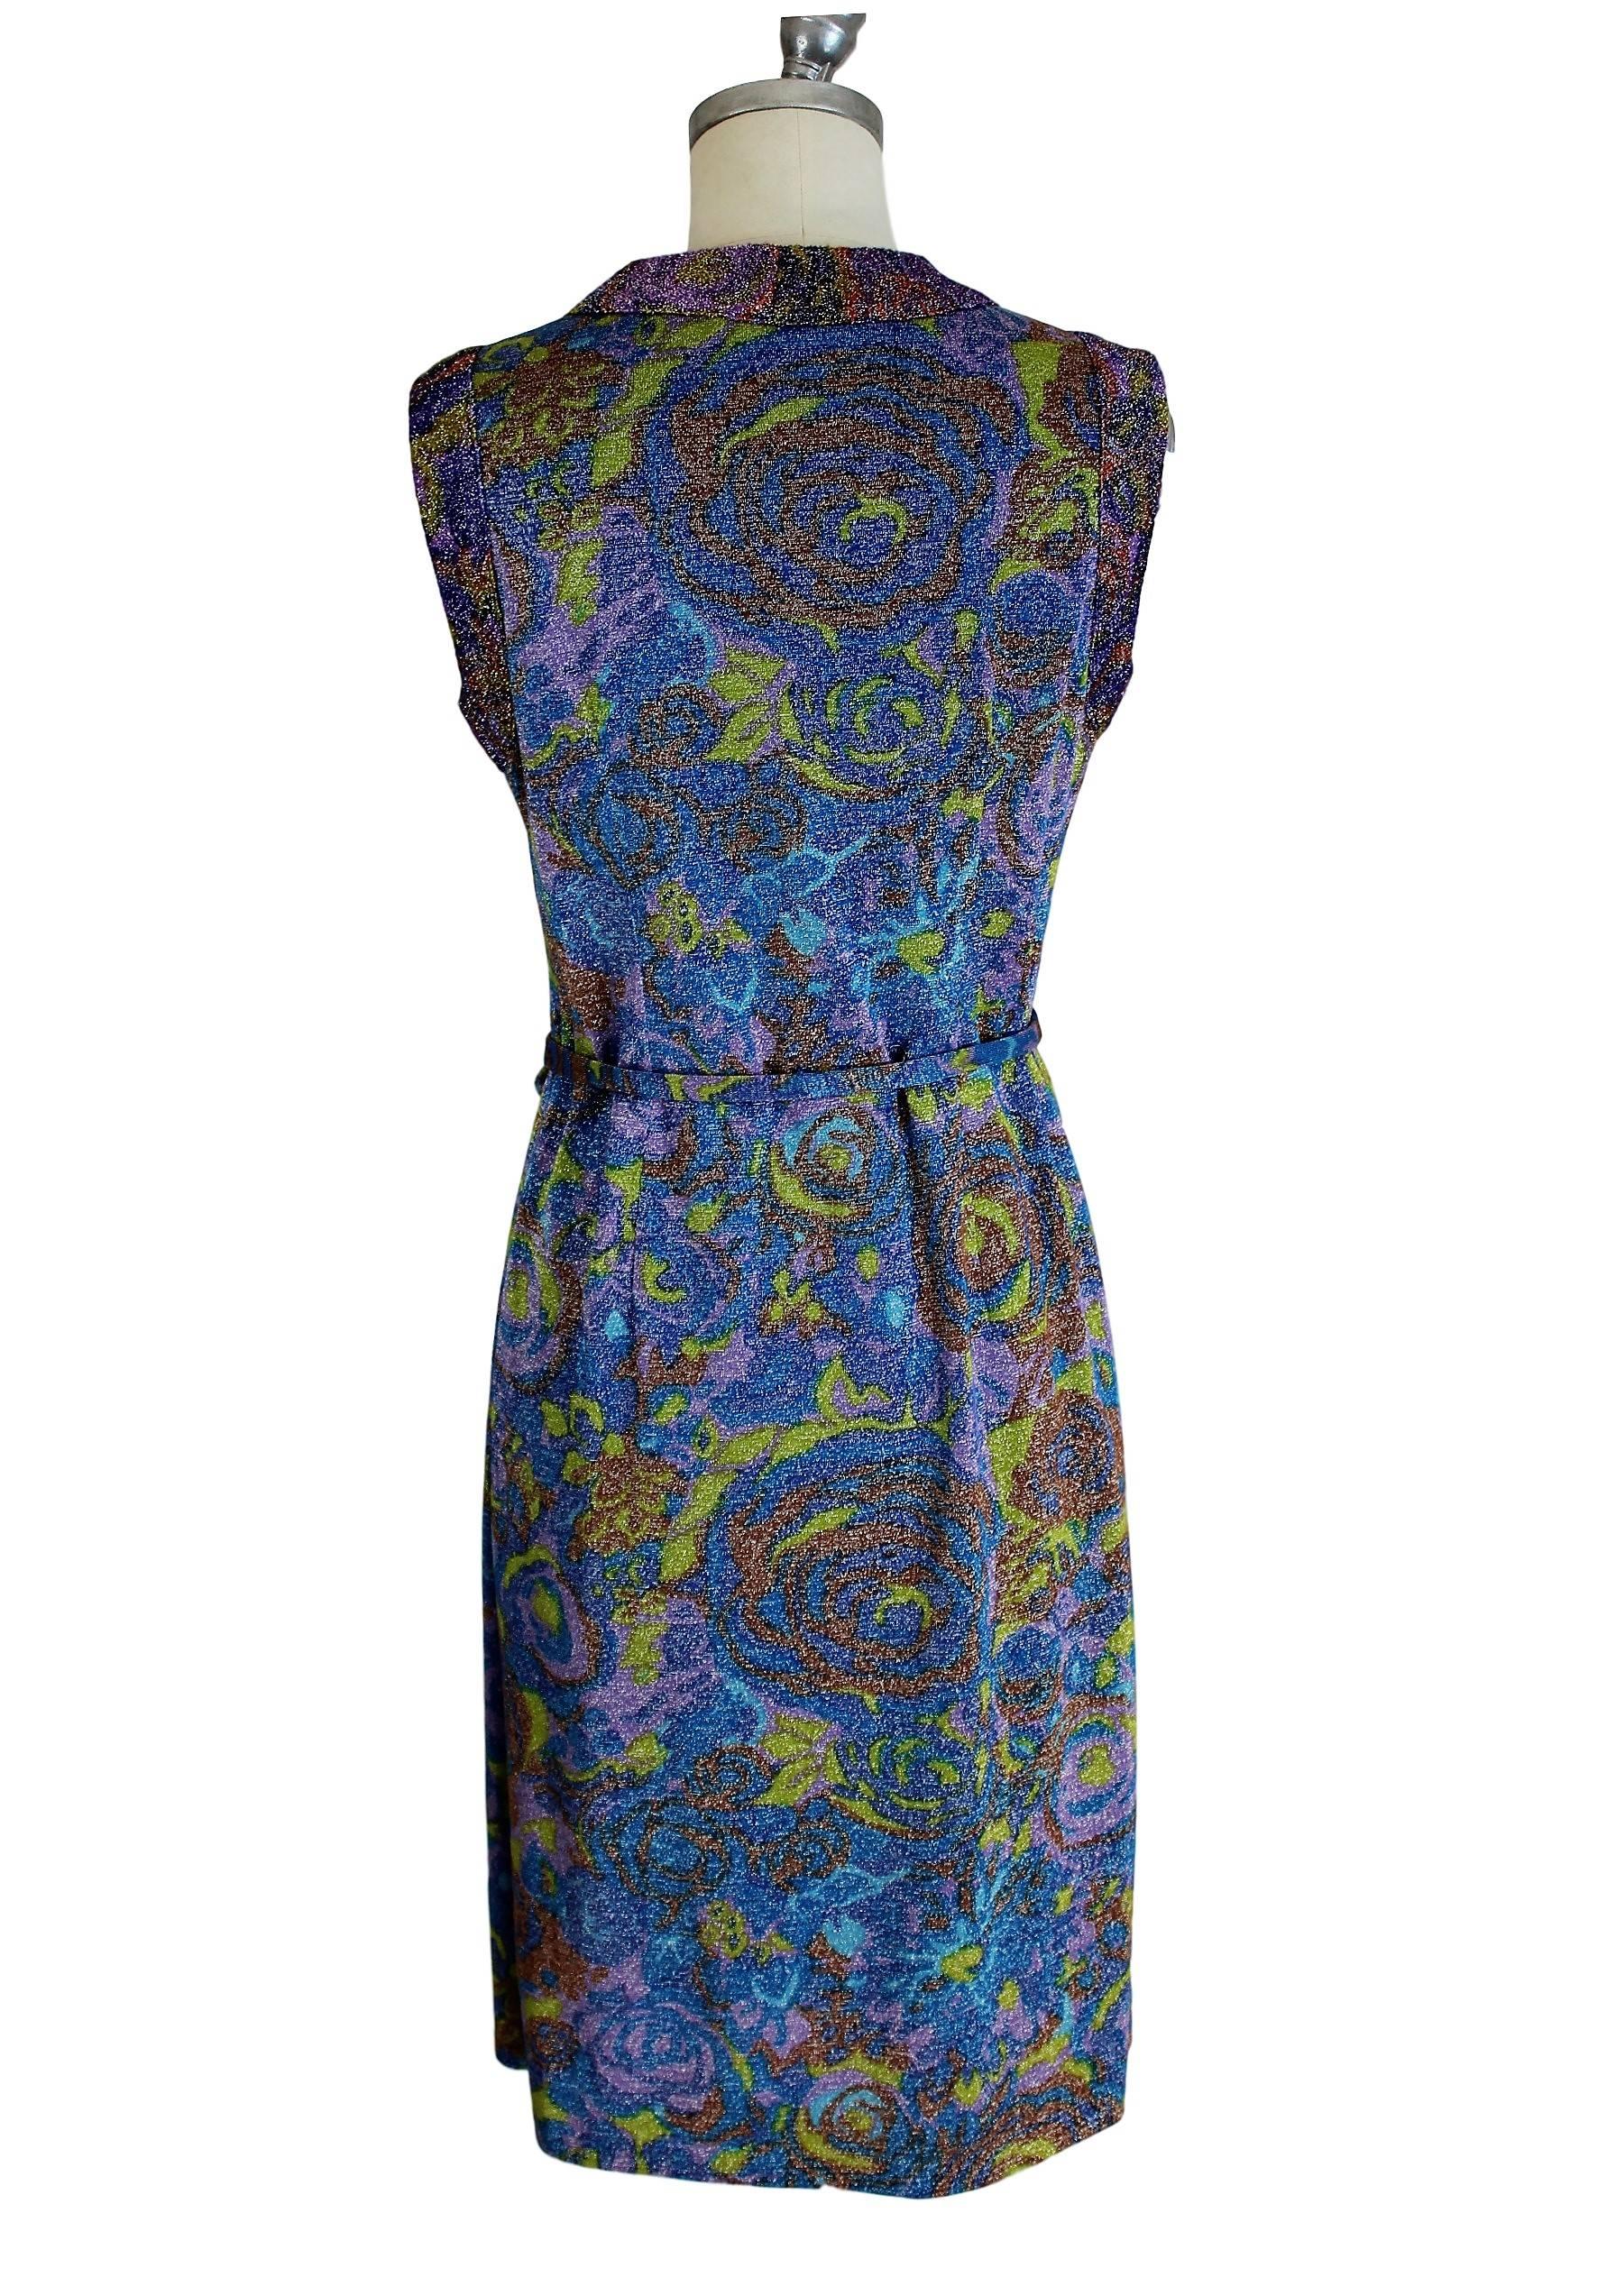 Sorelle Fontana gleaming metallic floral blue wool sleeveless dress, 1960s  In Excellent Condition For Sale In Brindisi, IT